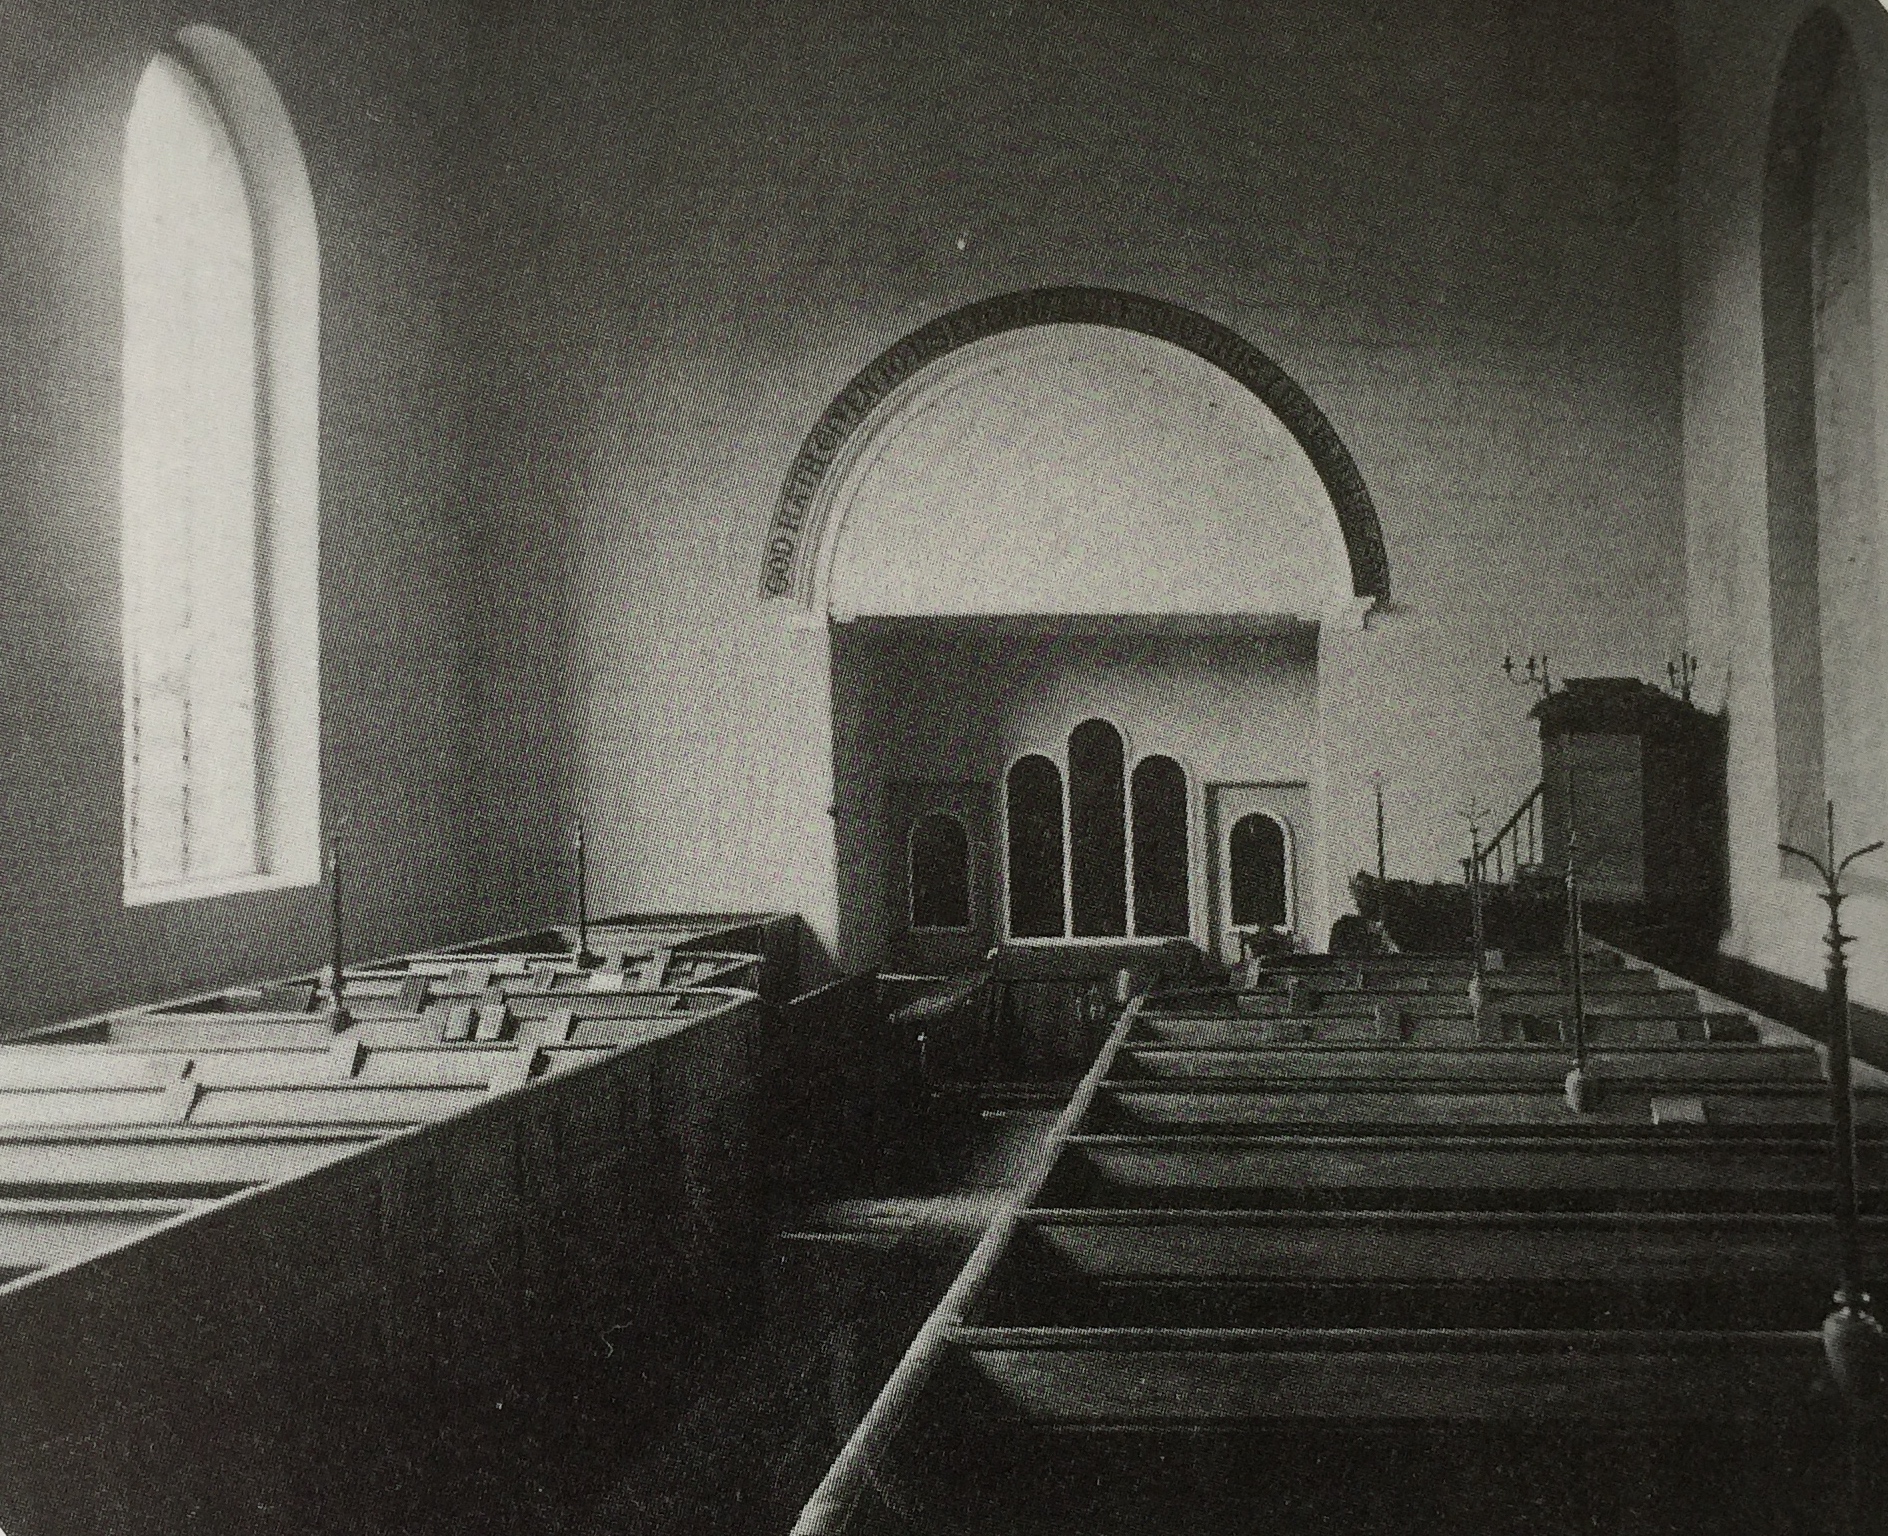 Late 19th Century interior of St Bartholomew's. The box pews were swept away in later remodelling which also added a chancel. (WSRO)